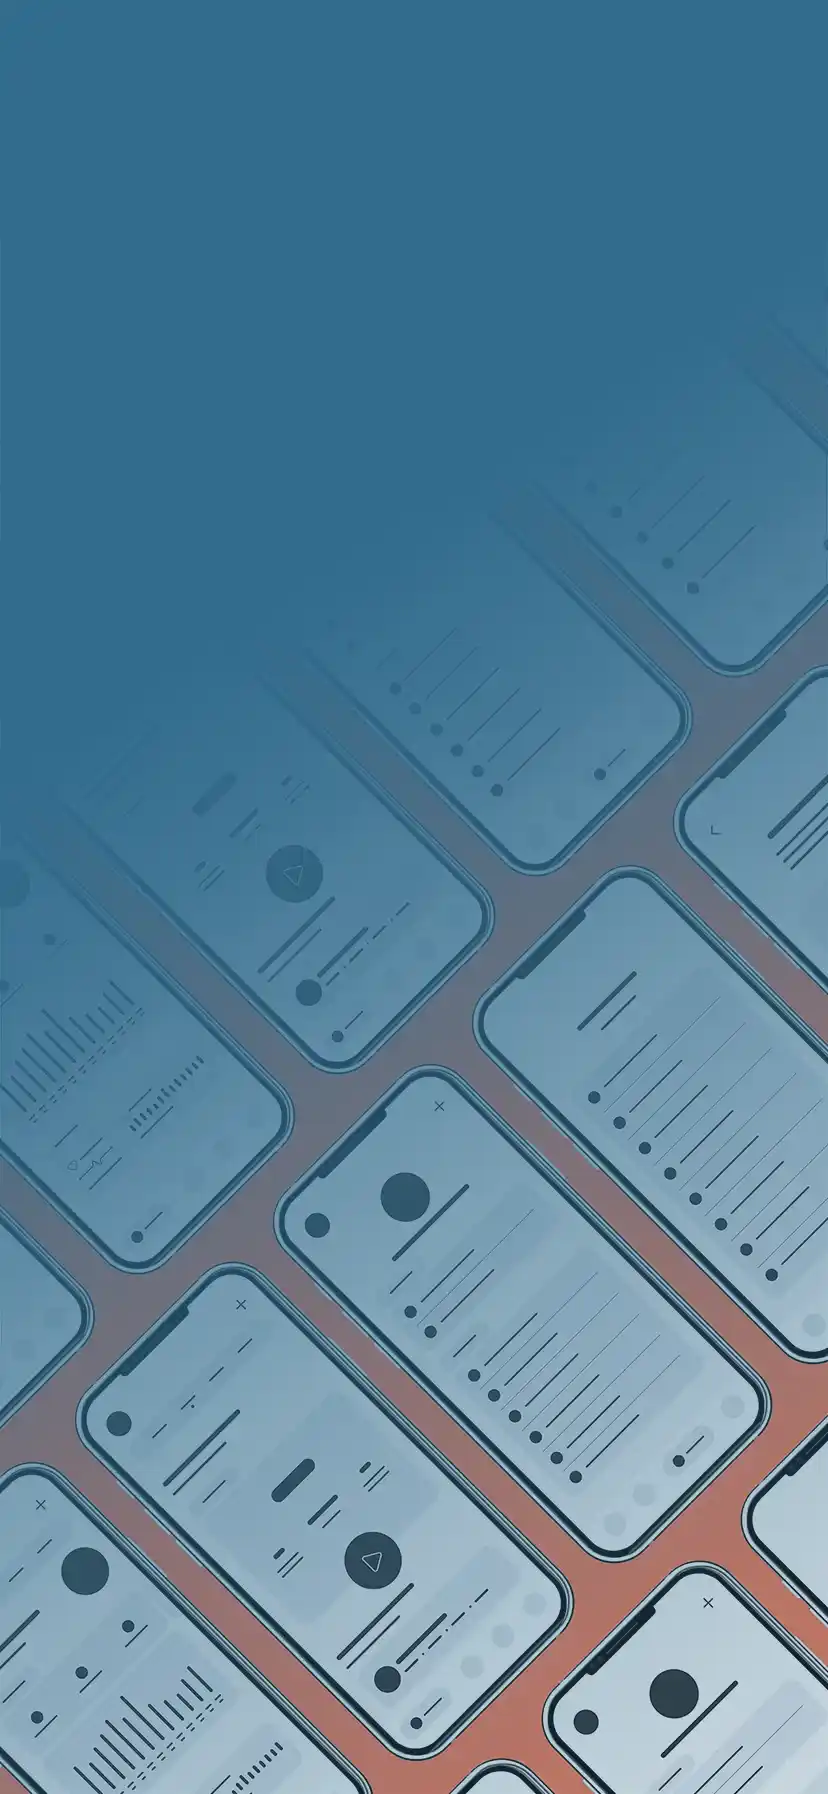 A collage of phones containing various wireframe prototypes